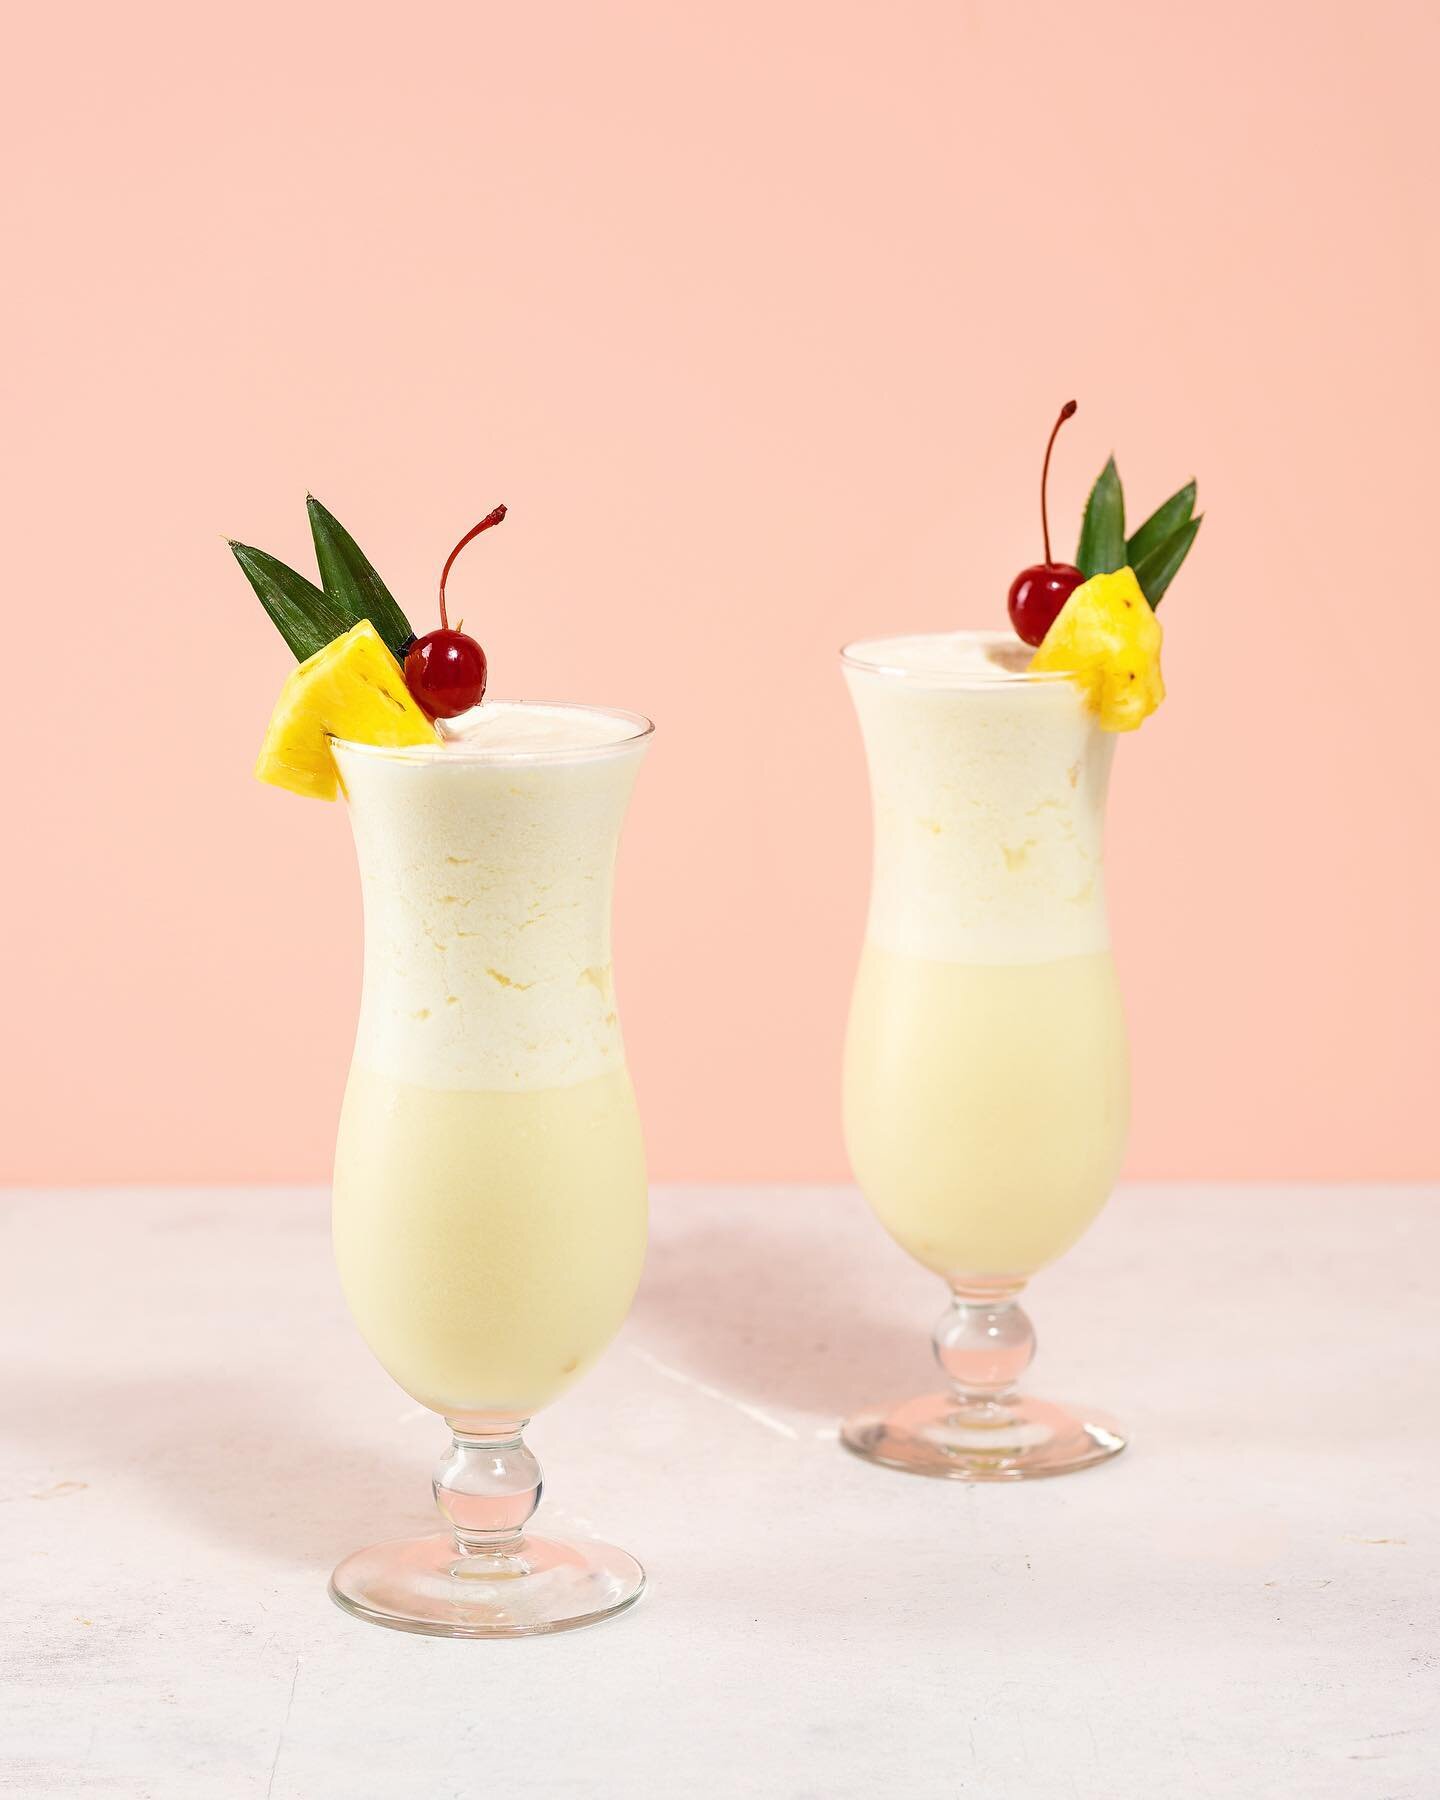 Is it ...day yet?  Super, that means it&rsquo;s time to drink these cold tropical cocktails in the warm sunshine. 
The cocktail section of our cookbook #TheCouplesCookbook was handled by a true professional @newman_kara, and was not only our favorite